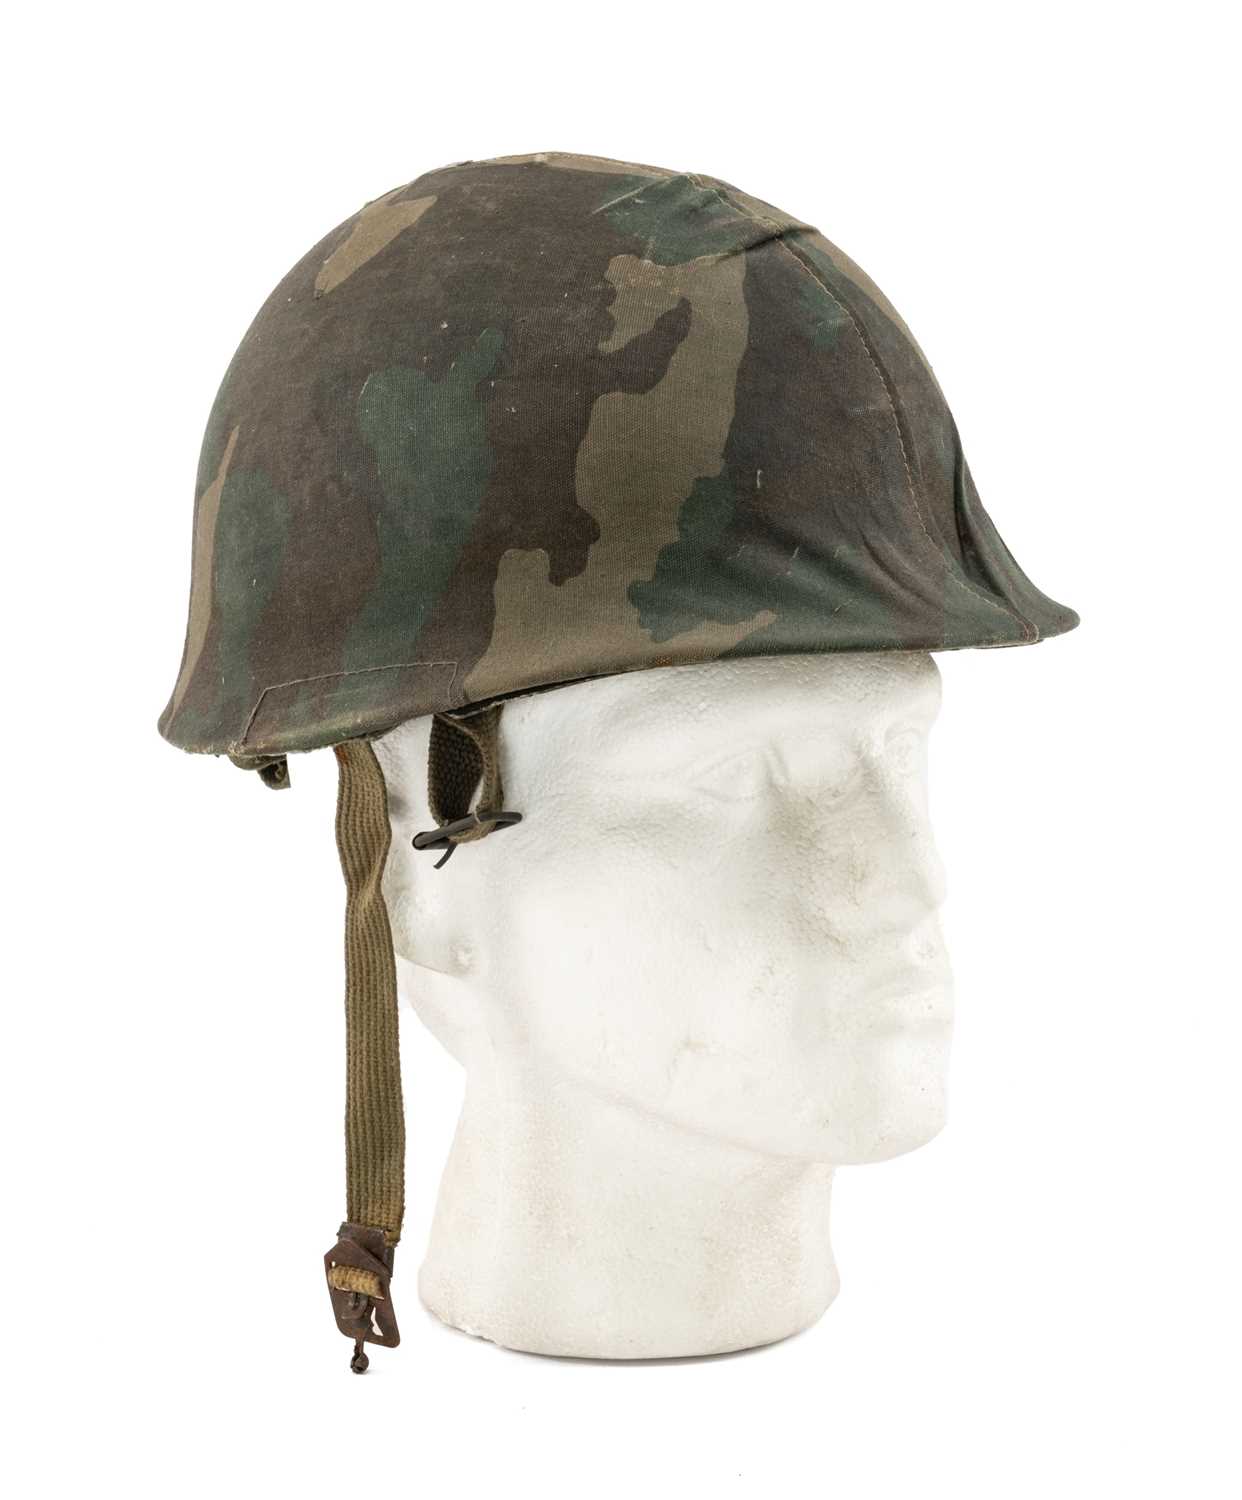 THE MILITARY CLUB HOUSE: A 1982 ARGENTINE INFANTRY HELMET FROM THE FALKLANDS CONFLICT with